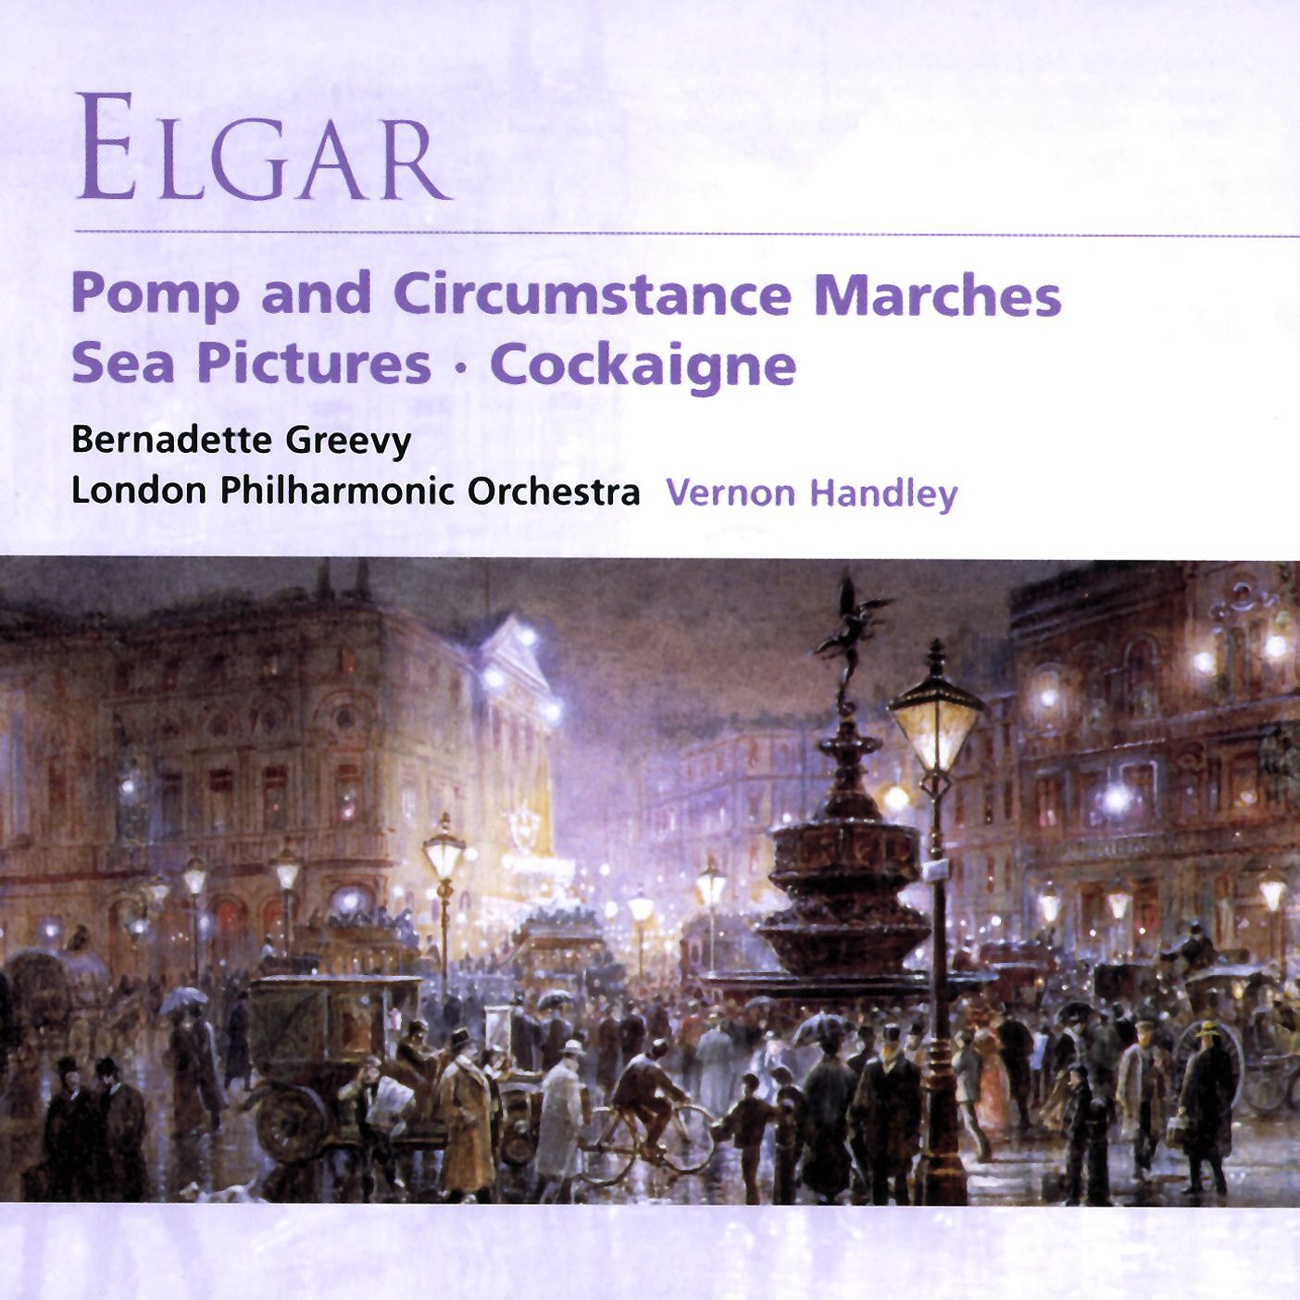 Pomp and Circumstance - Military Marches Op. 39:No. 4 in G